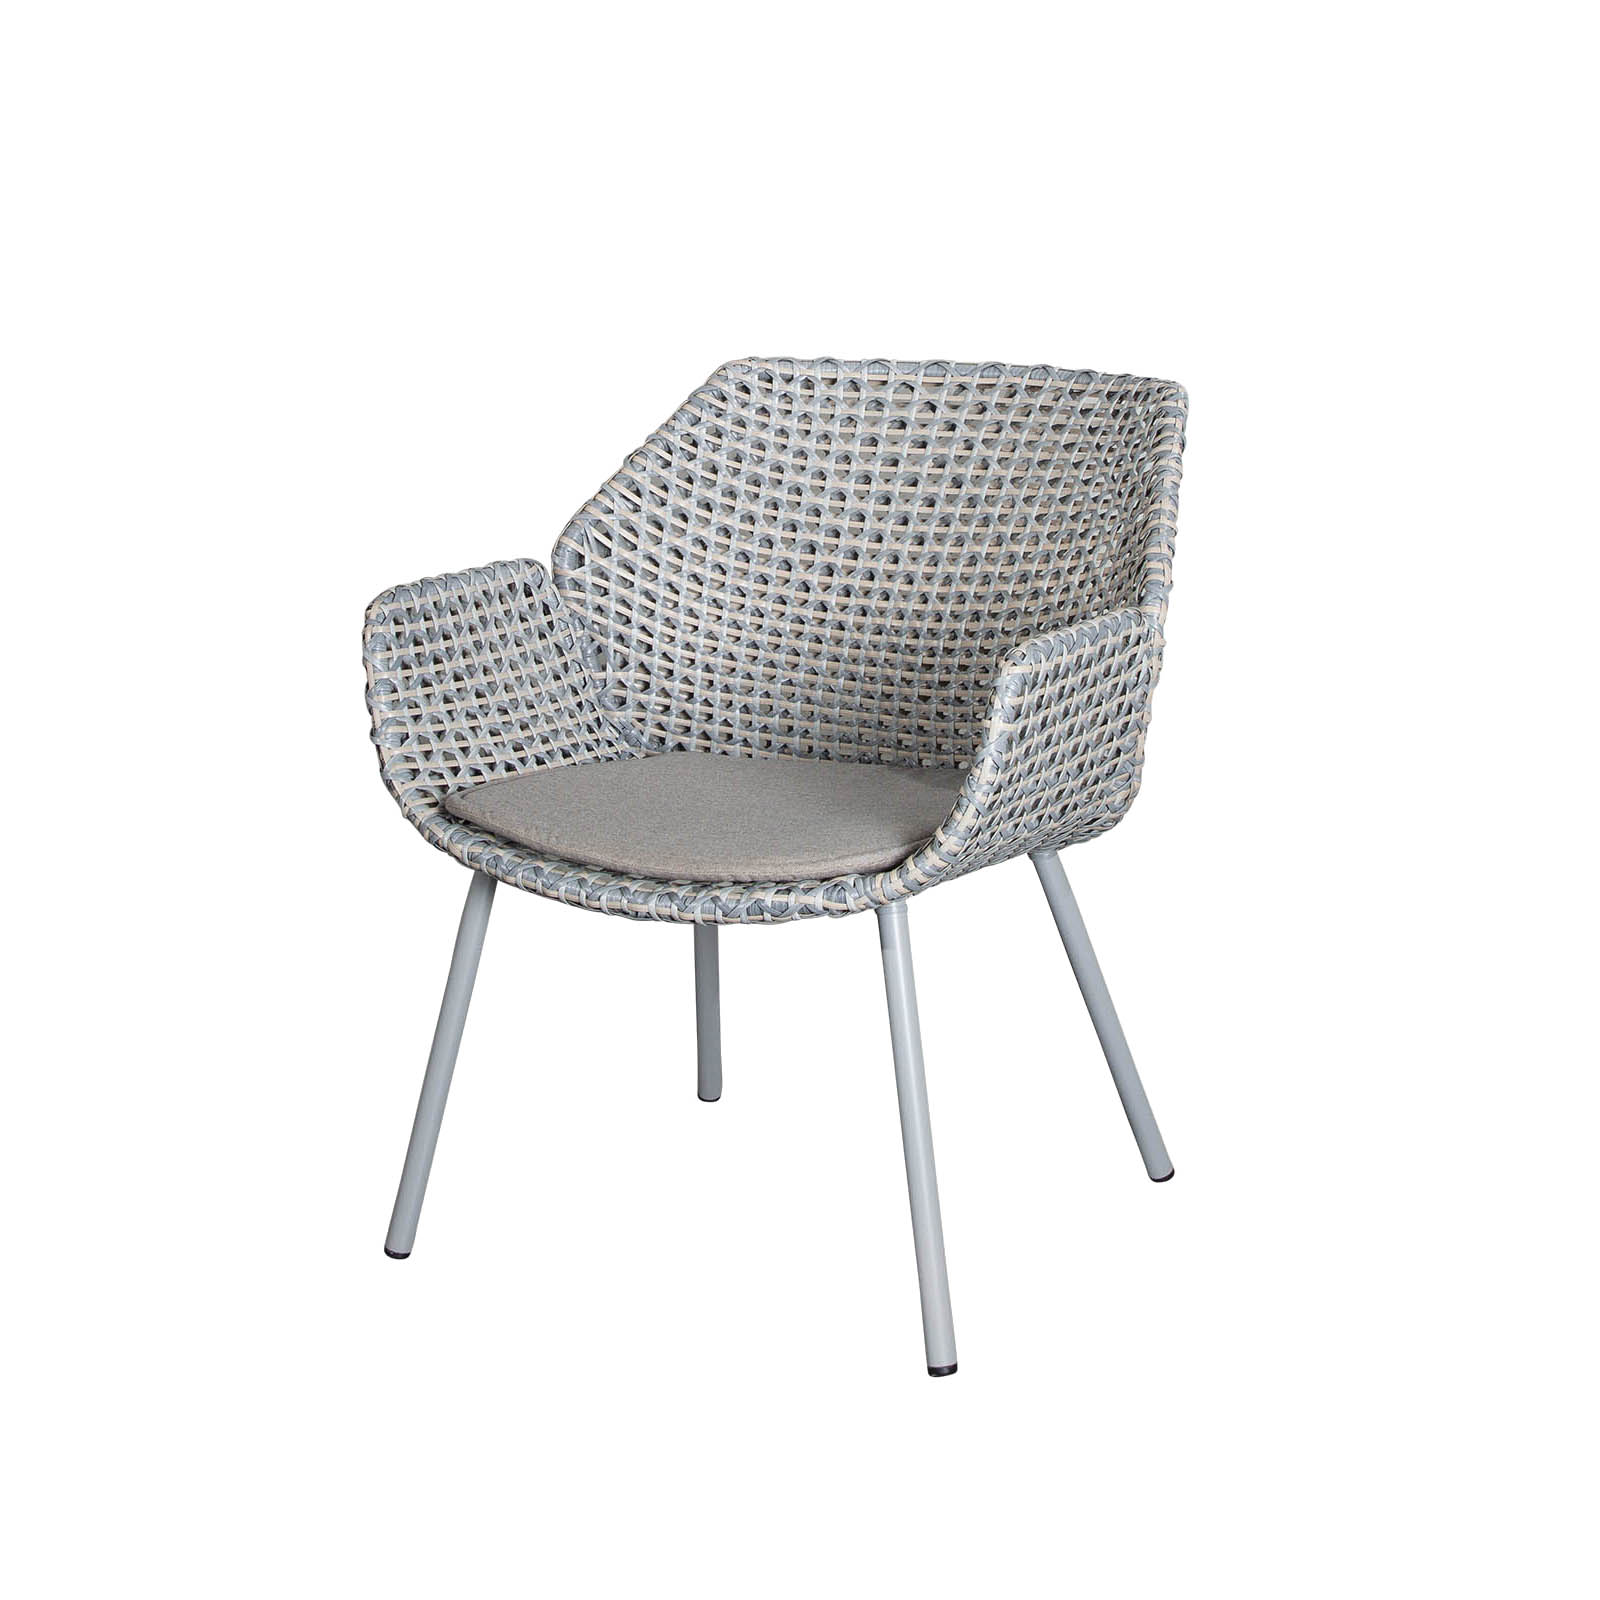 Vibe Loungesessel aus Cane-line Weave in Light Grey mit Kissen aus Cane-line Natté in Taupe